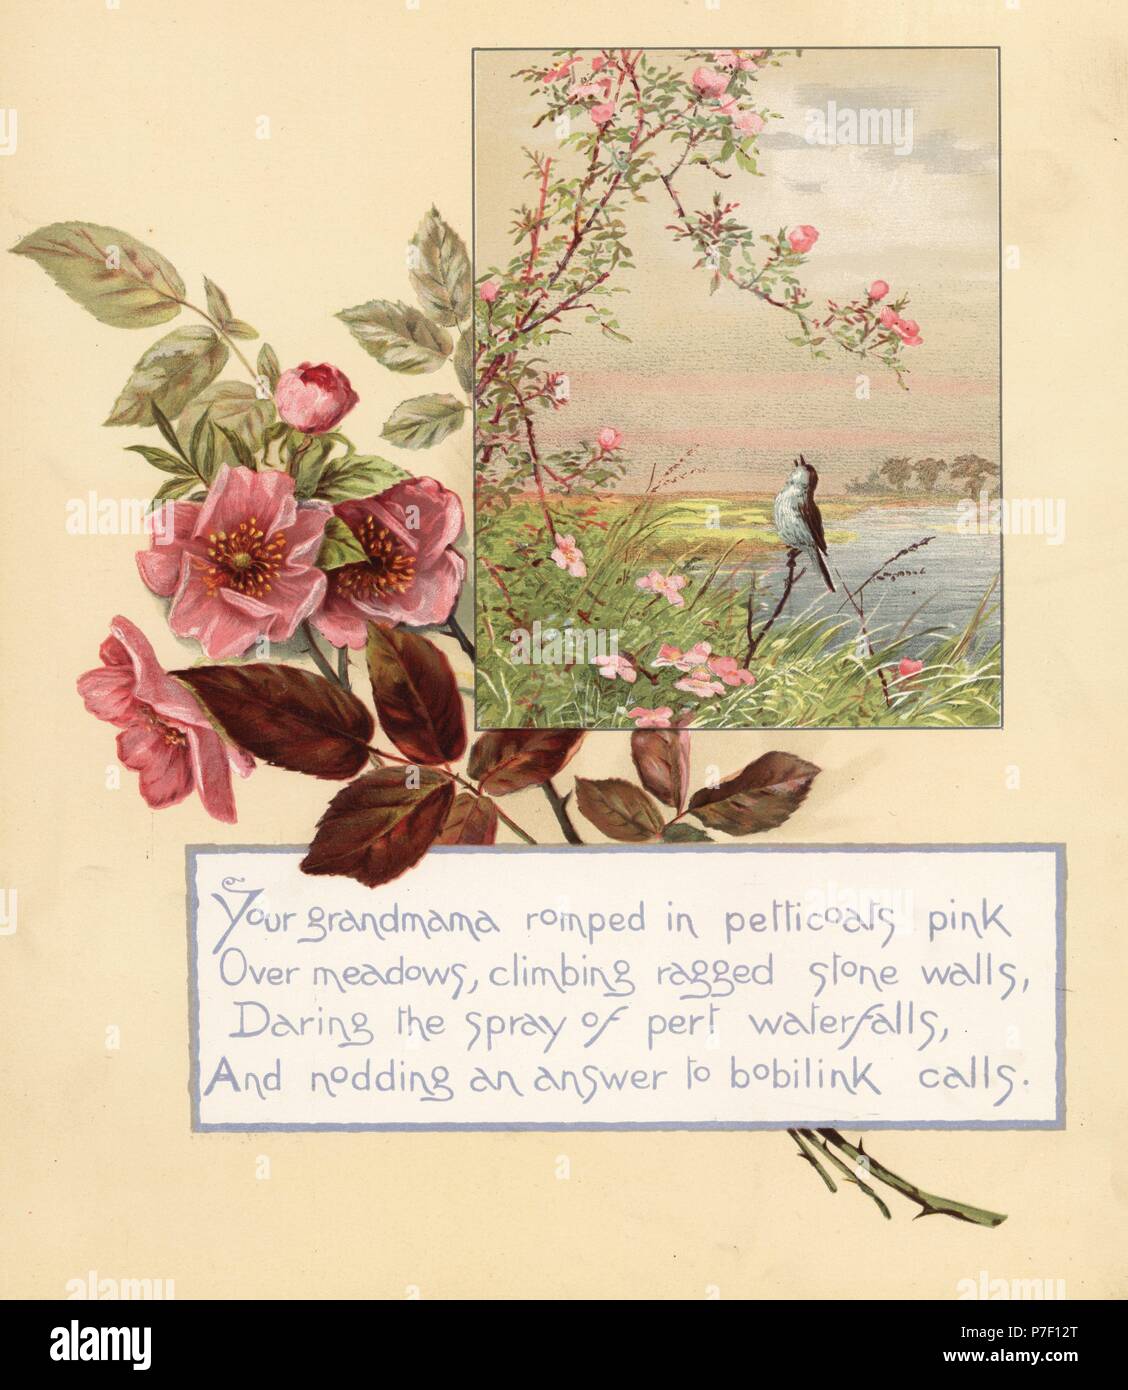 Roses, Rosa canina, with landscape and song bird, and calligraphic poem. Chromolithograph by Louis Prang from Alice Ward Bailey's Flower Fancies, Boston, 1889. Illustrated by Lucy Baily, Eleanor Ecob Morse, Olive Whitney, Ellen Fisher, Fidelia Bridges, C. Ryan and F. Schuyler Mathews. Stock Photo